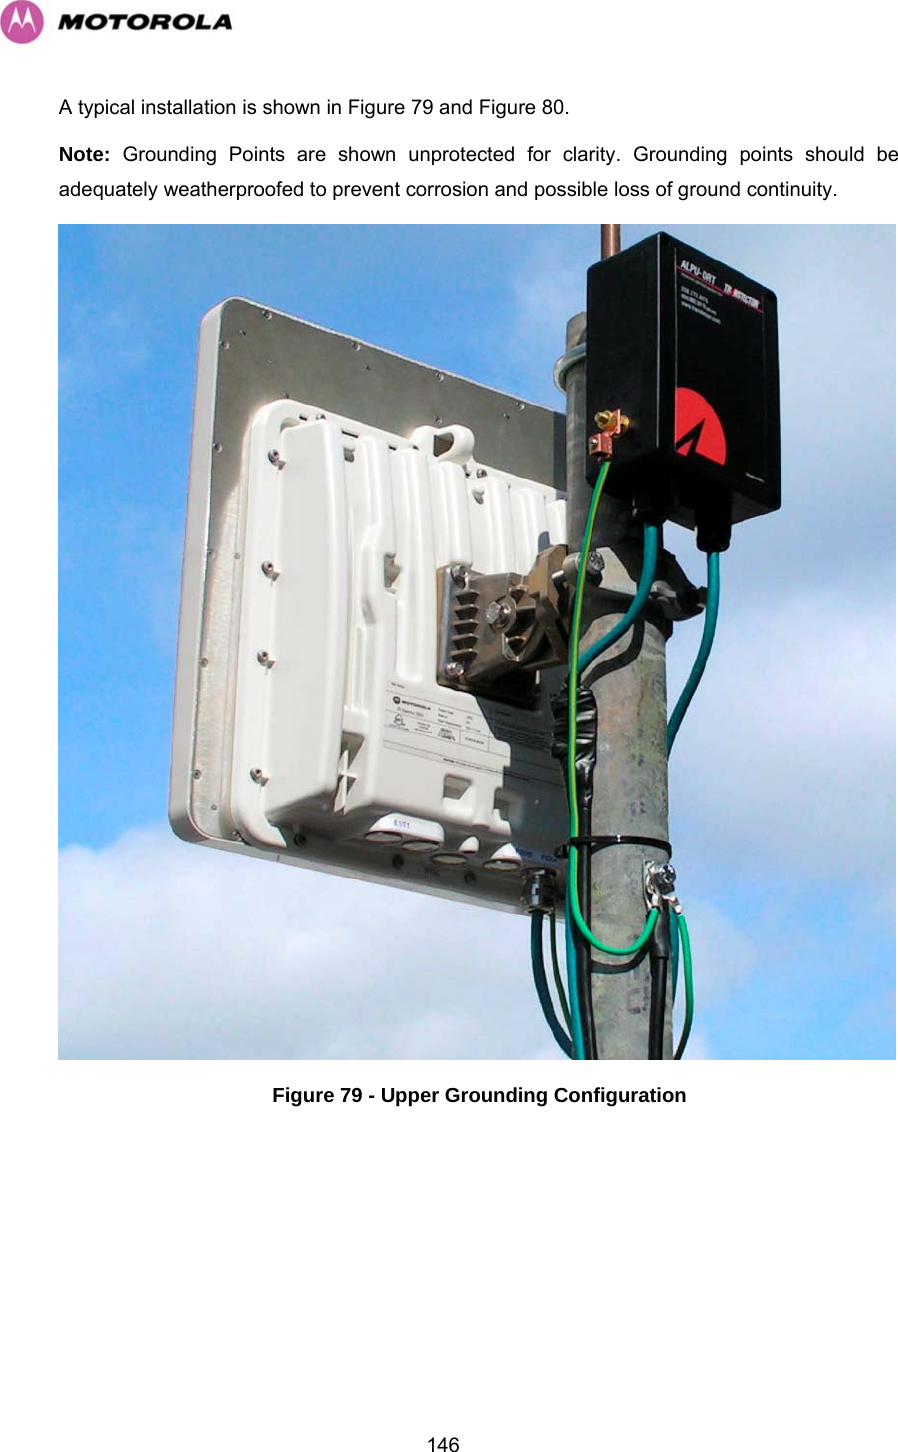   146A typical installation is shown in Figure 79 and Figure 80. Note: Grounding Points are shown unprotected for clarity. Grounding points should be adequately weatherproofed to prevent corrosion and possible loss of ground continuity.  Figure 79 - Upper Grounding Configuration 